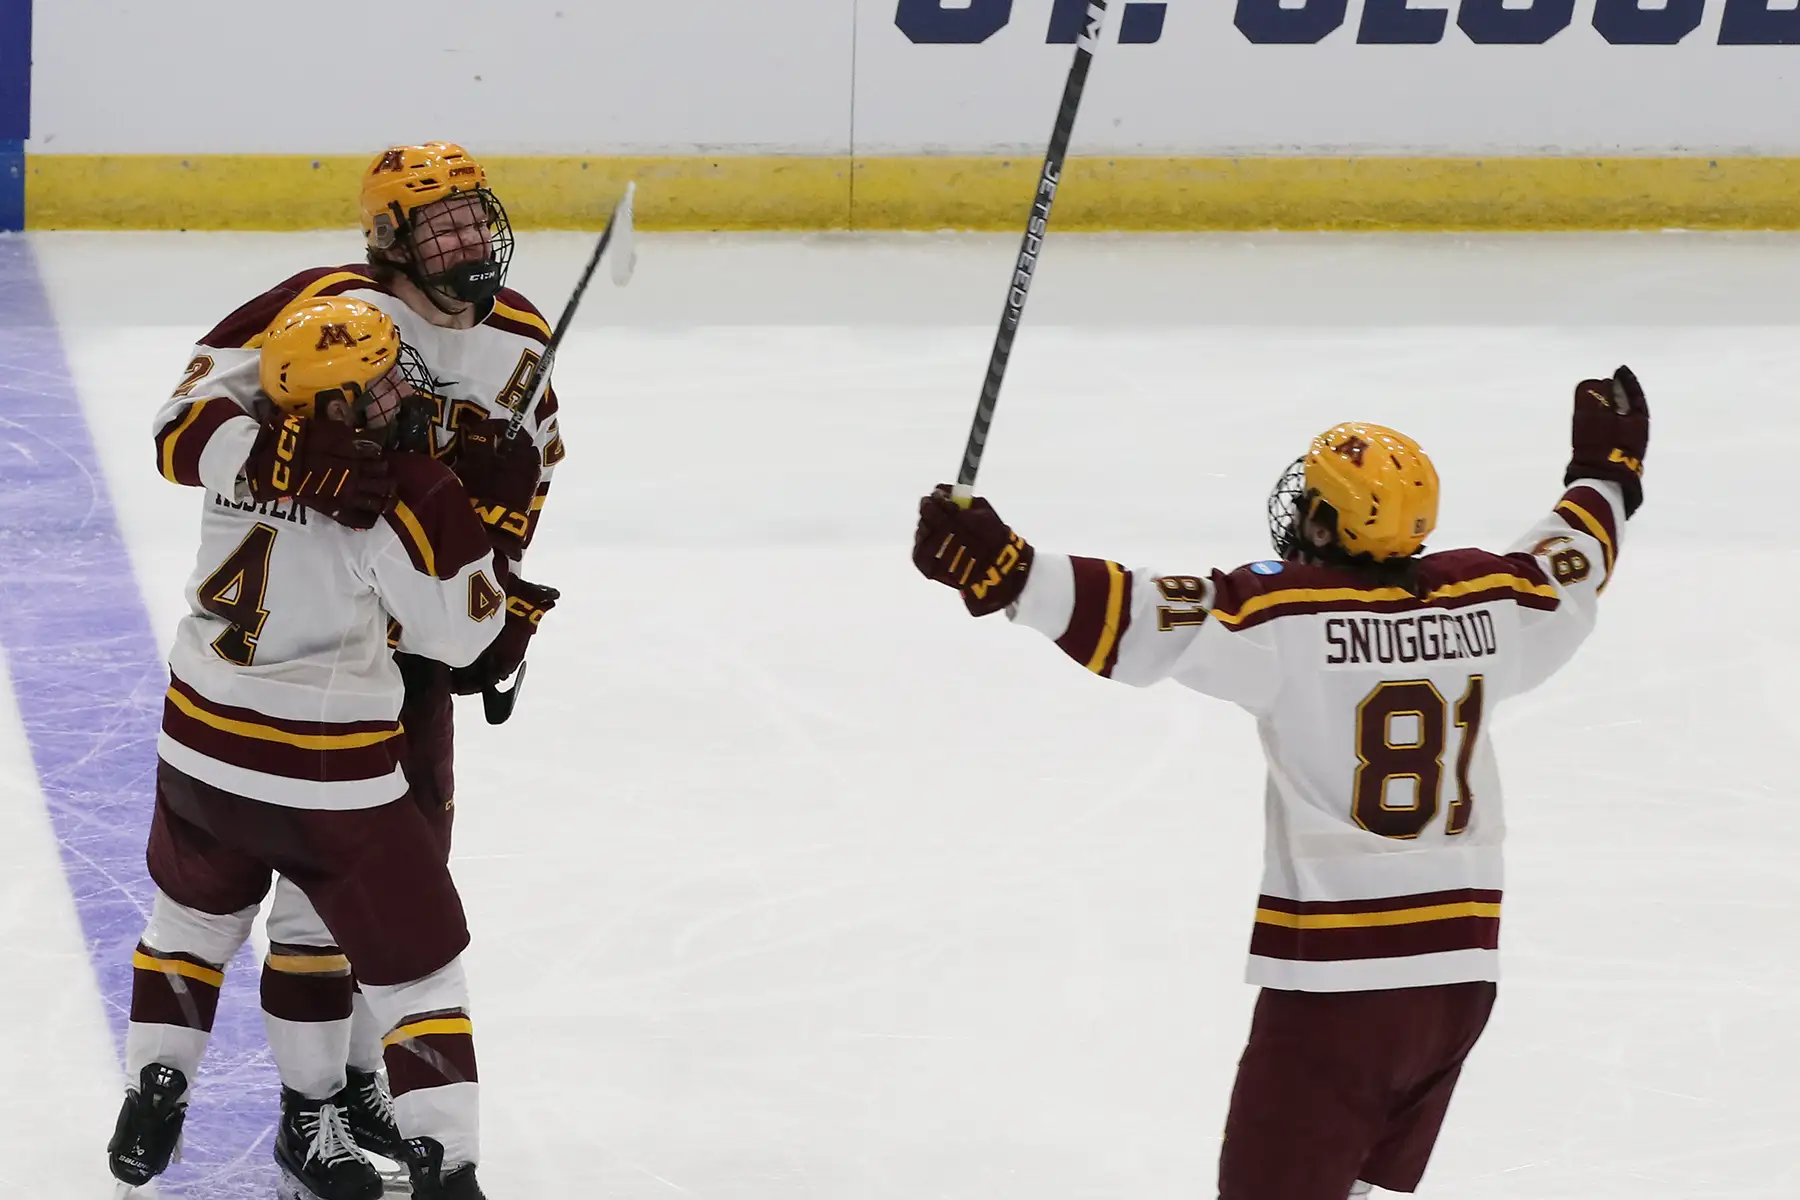 LaCombe celebrates his goal with Koster & Snuggerud. Photo by Craig Cotner